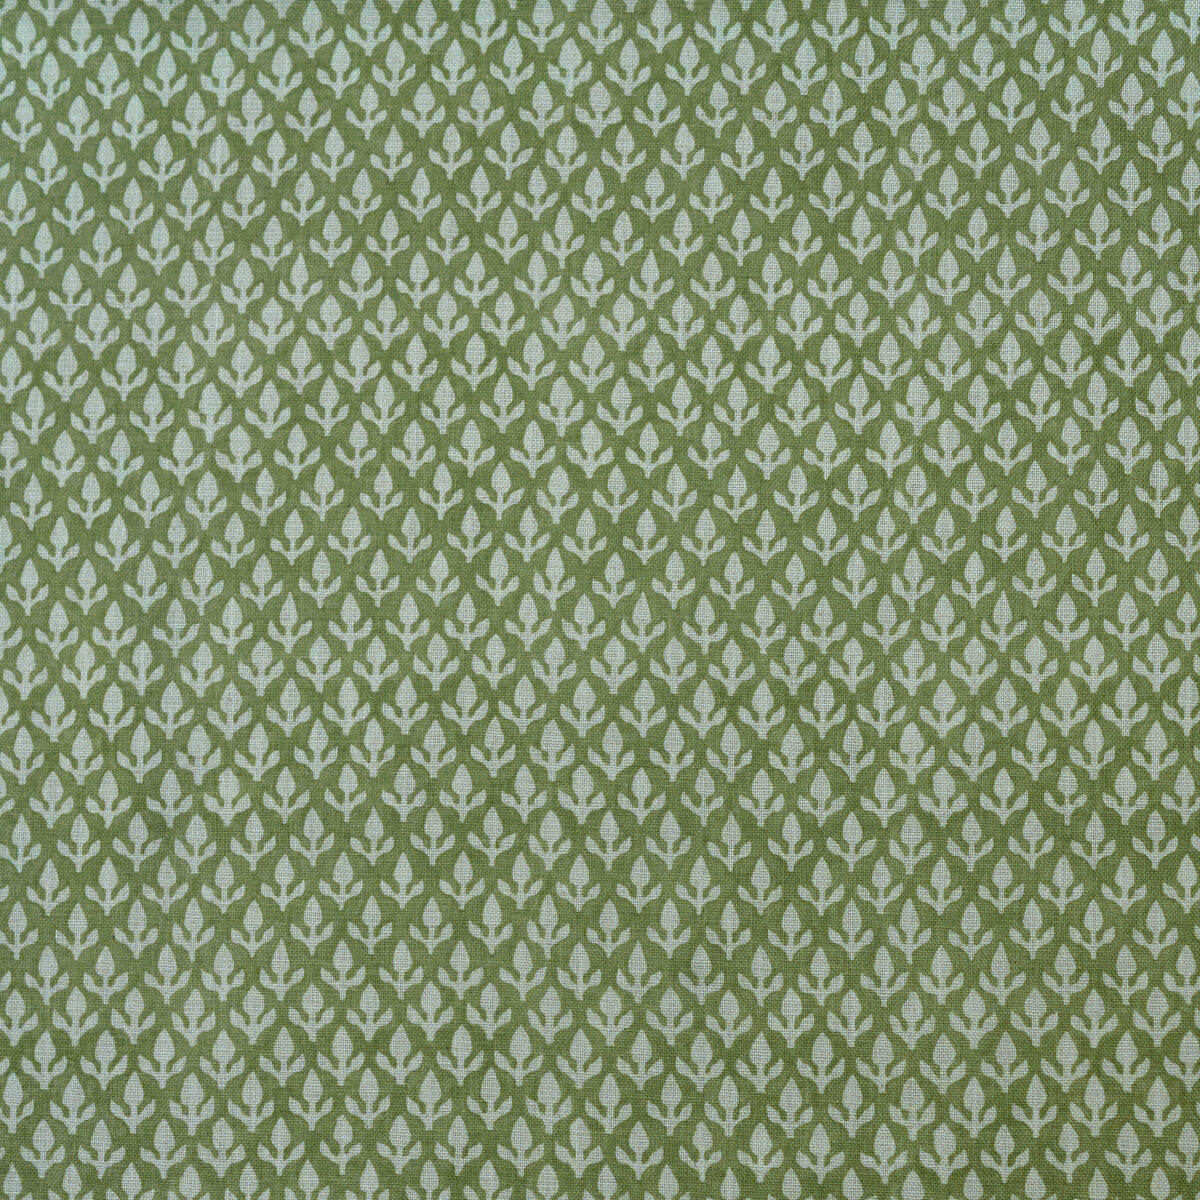 Bud fabric in leaf color - pattern AM100379.3.0 - by Kravet Couture in the Andrew Martin Garden Path collection